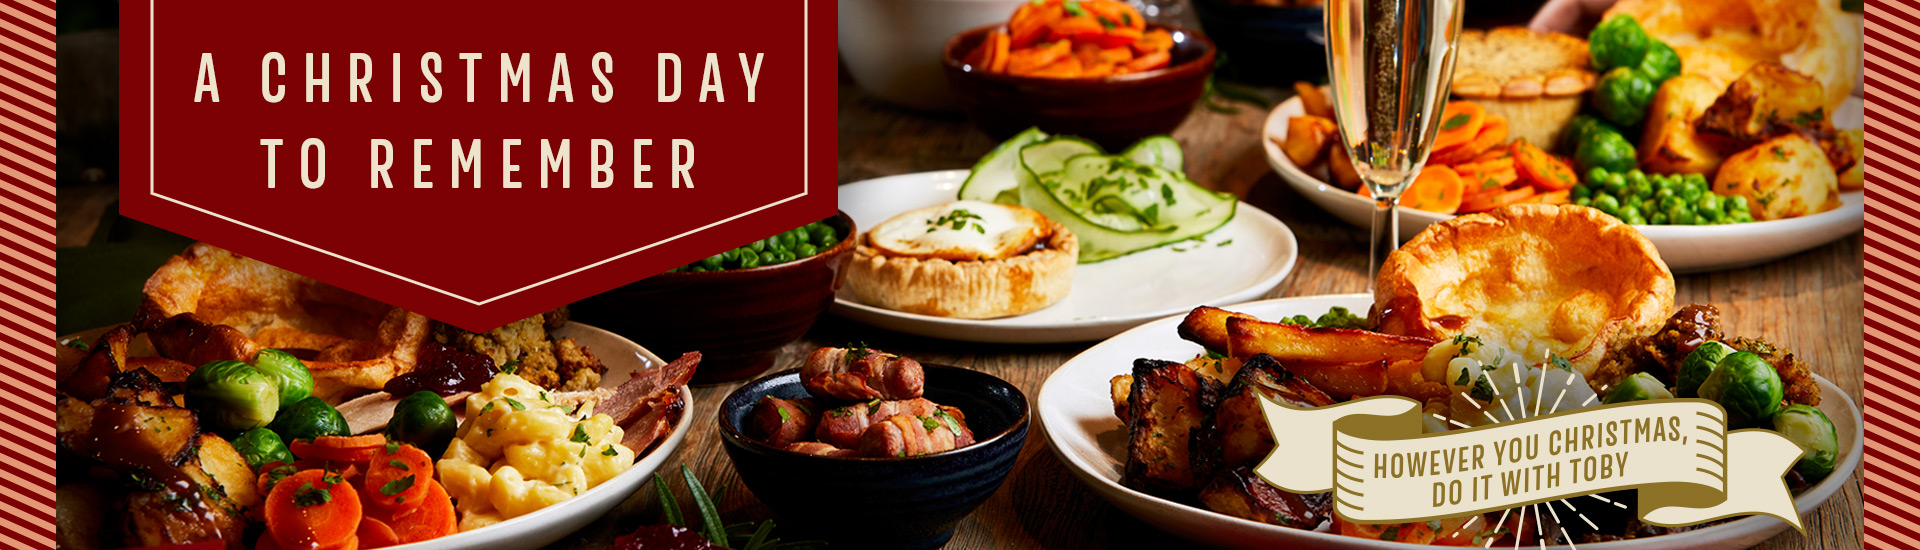 Christmas Day menu at Toby Carvery Burnt Tree Island